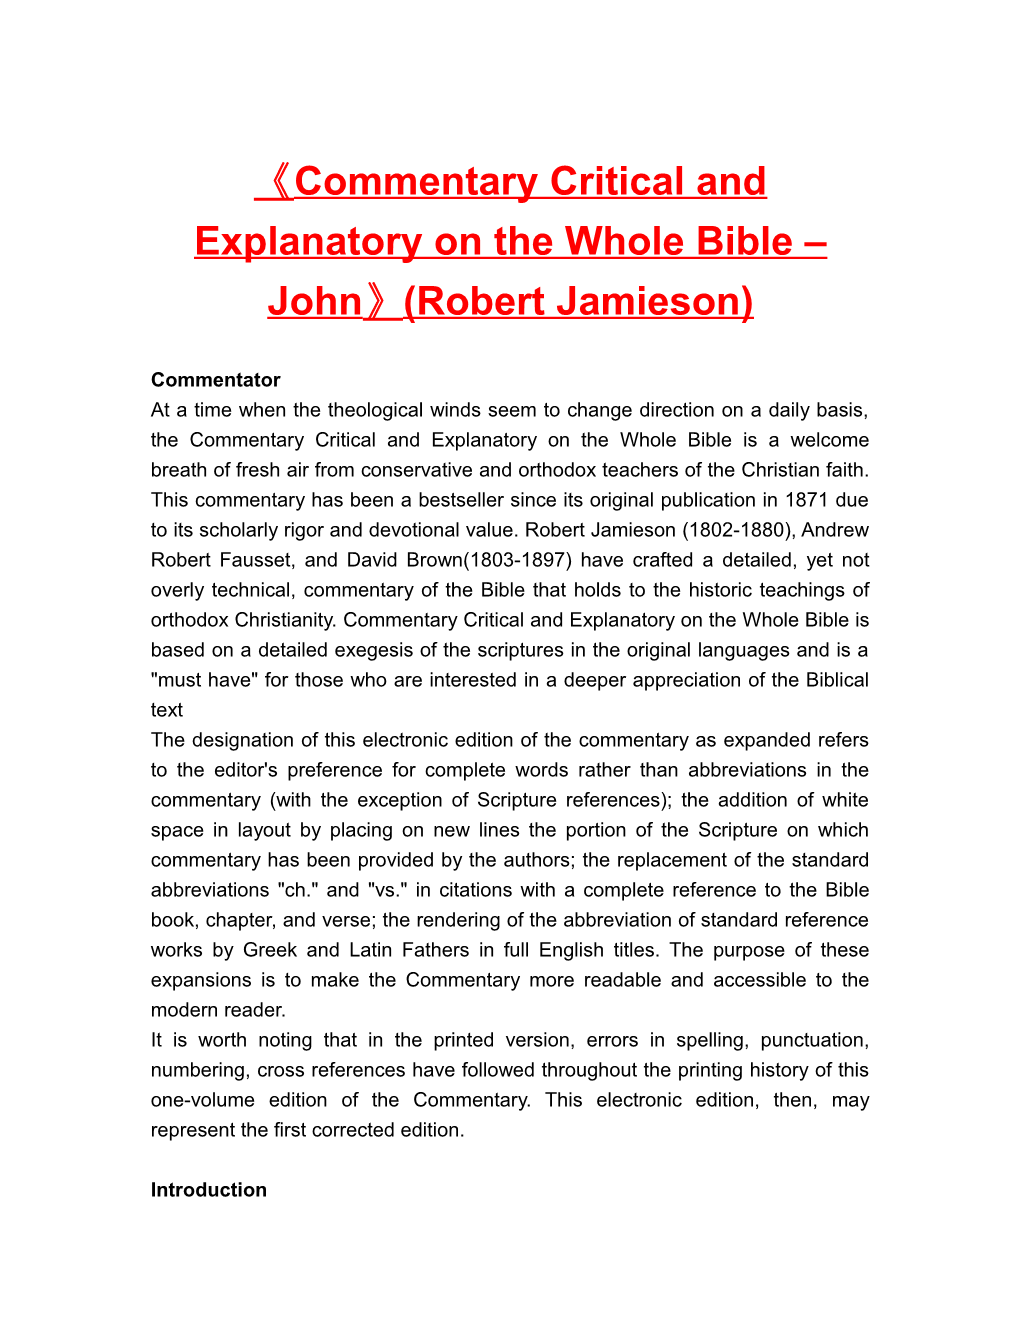 Commentary Critical and Explanatory on the Whole Bible John (Robert Jamieson)